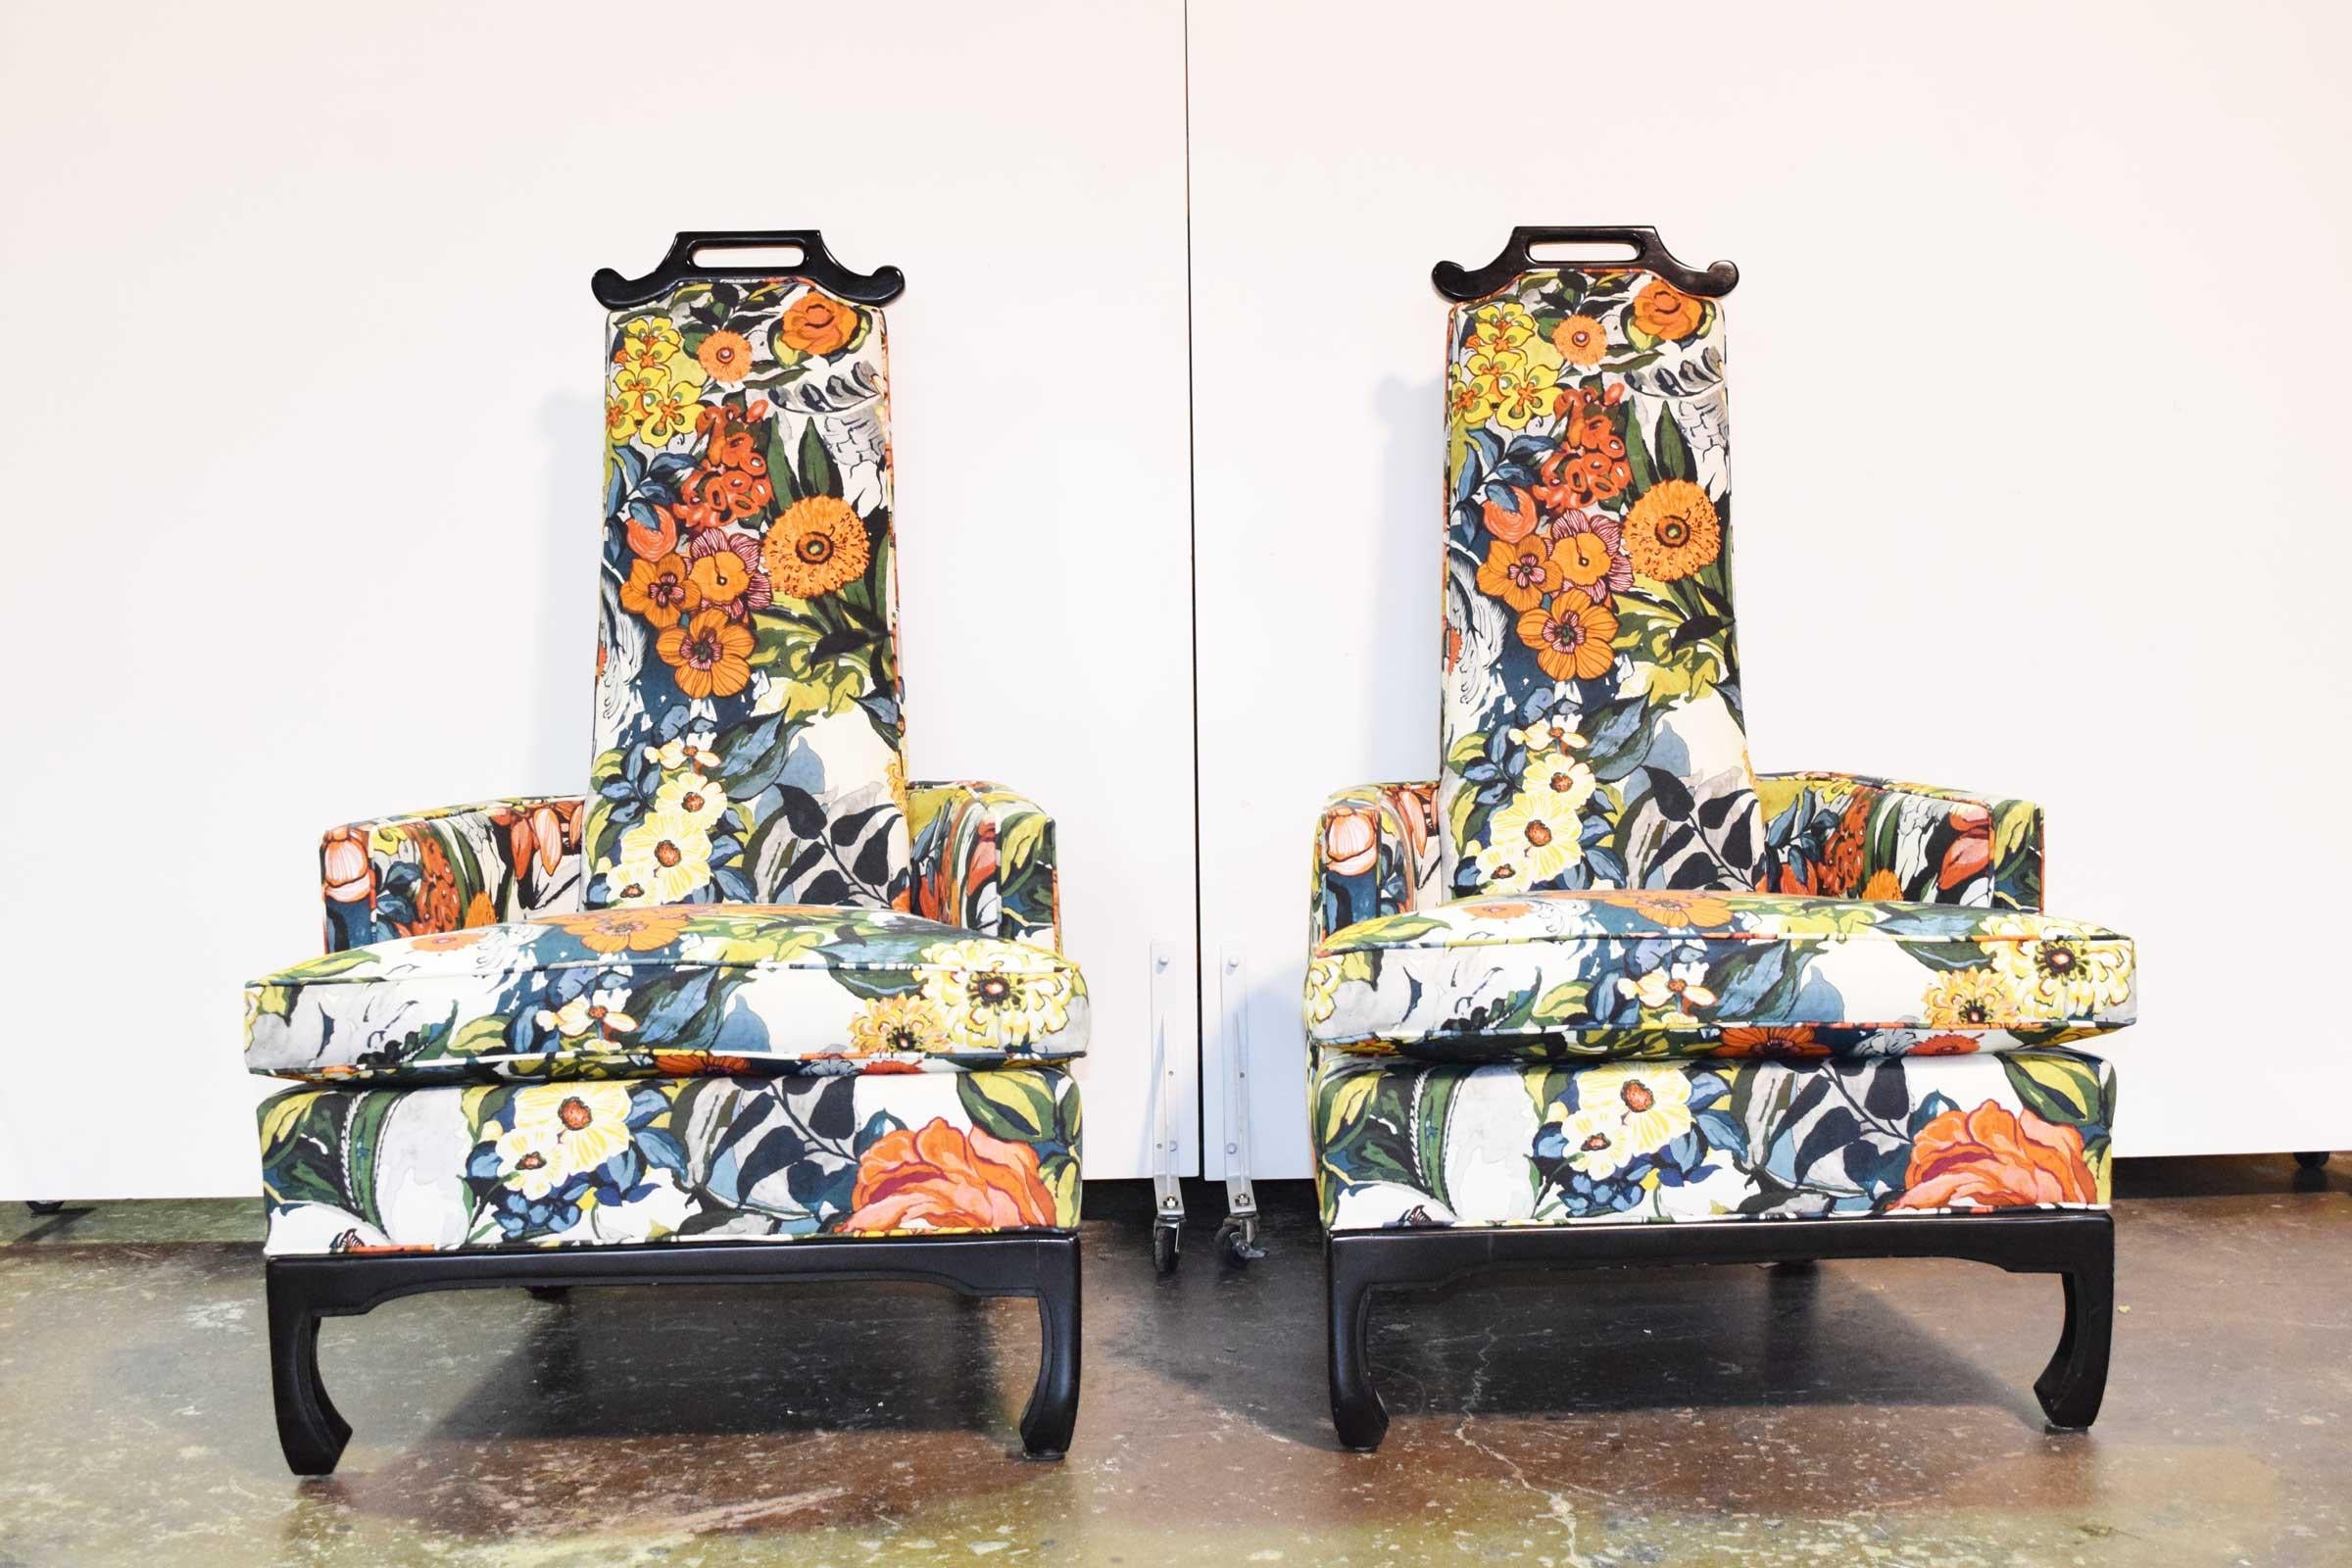 Reupholstered in a vibrant upholstery, Asian style chairs with ebonized finish by Henredon.